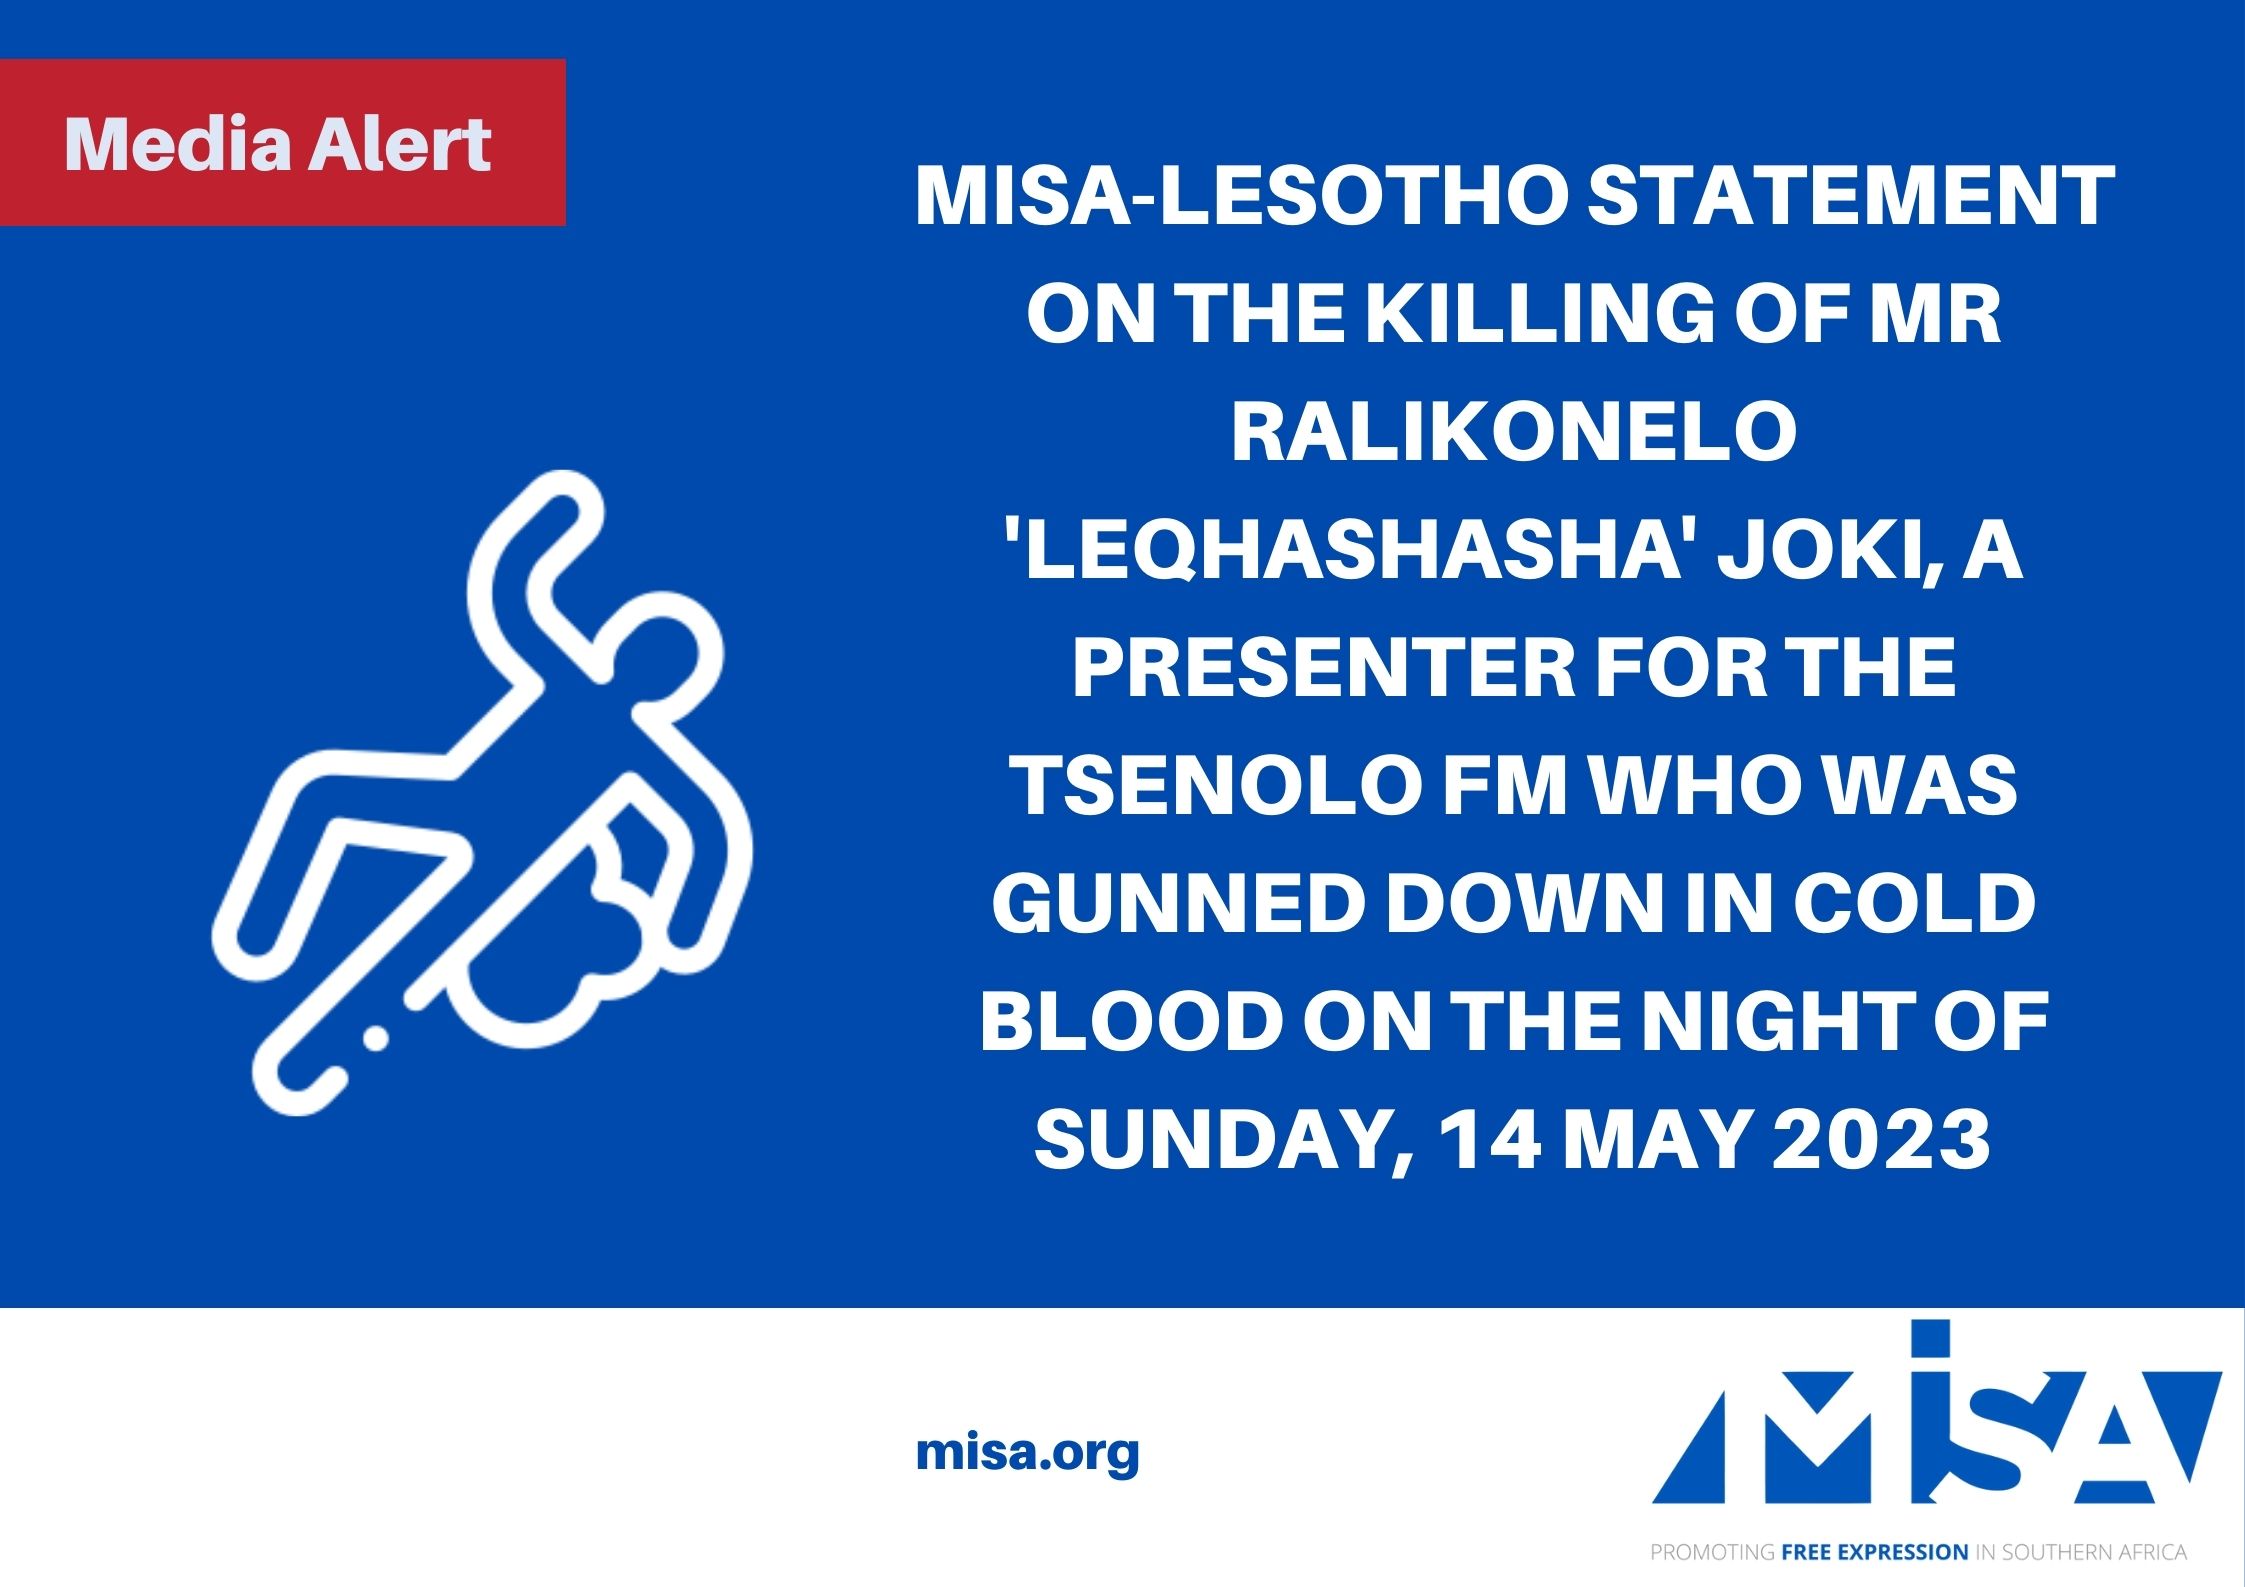 MISA-LESOTHO STATEMENT ON THE KILLING OF MR RALIKONELO ‘LEQHASHASHA’ JOKI, A PRESENTER FOR THE TSENOLO FM WHO WAS GUNNED DOWN IN COLD BLOOD ON THE NIGHT OF SUNDAY, 14 MAY 2023